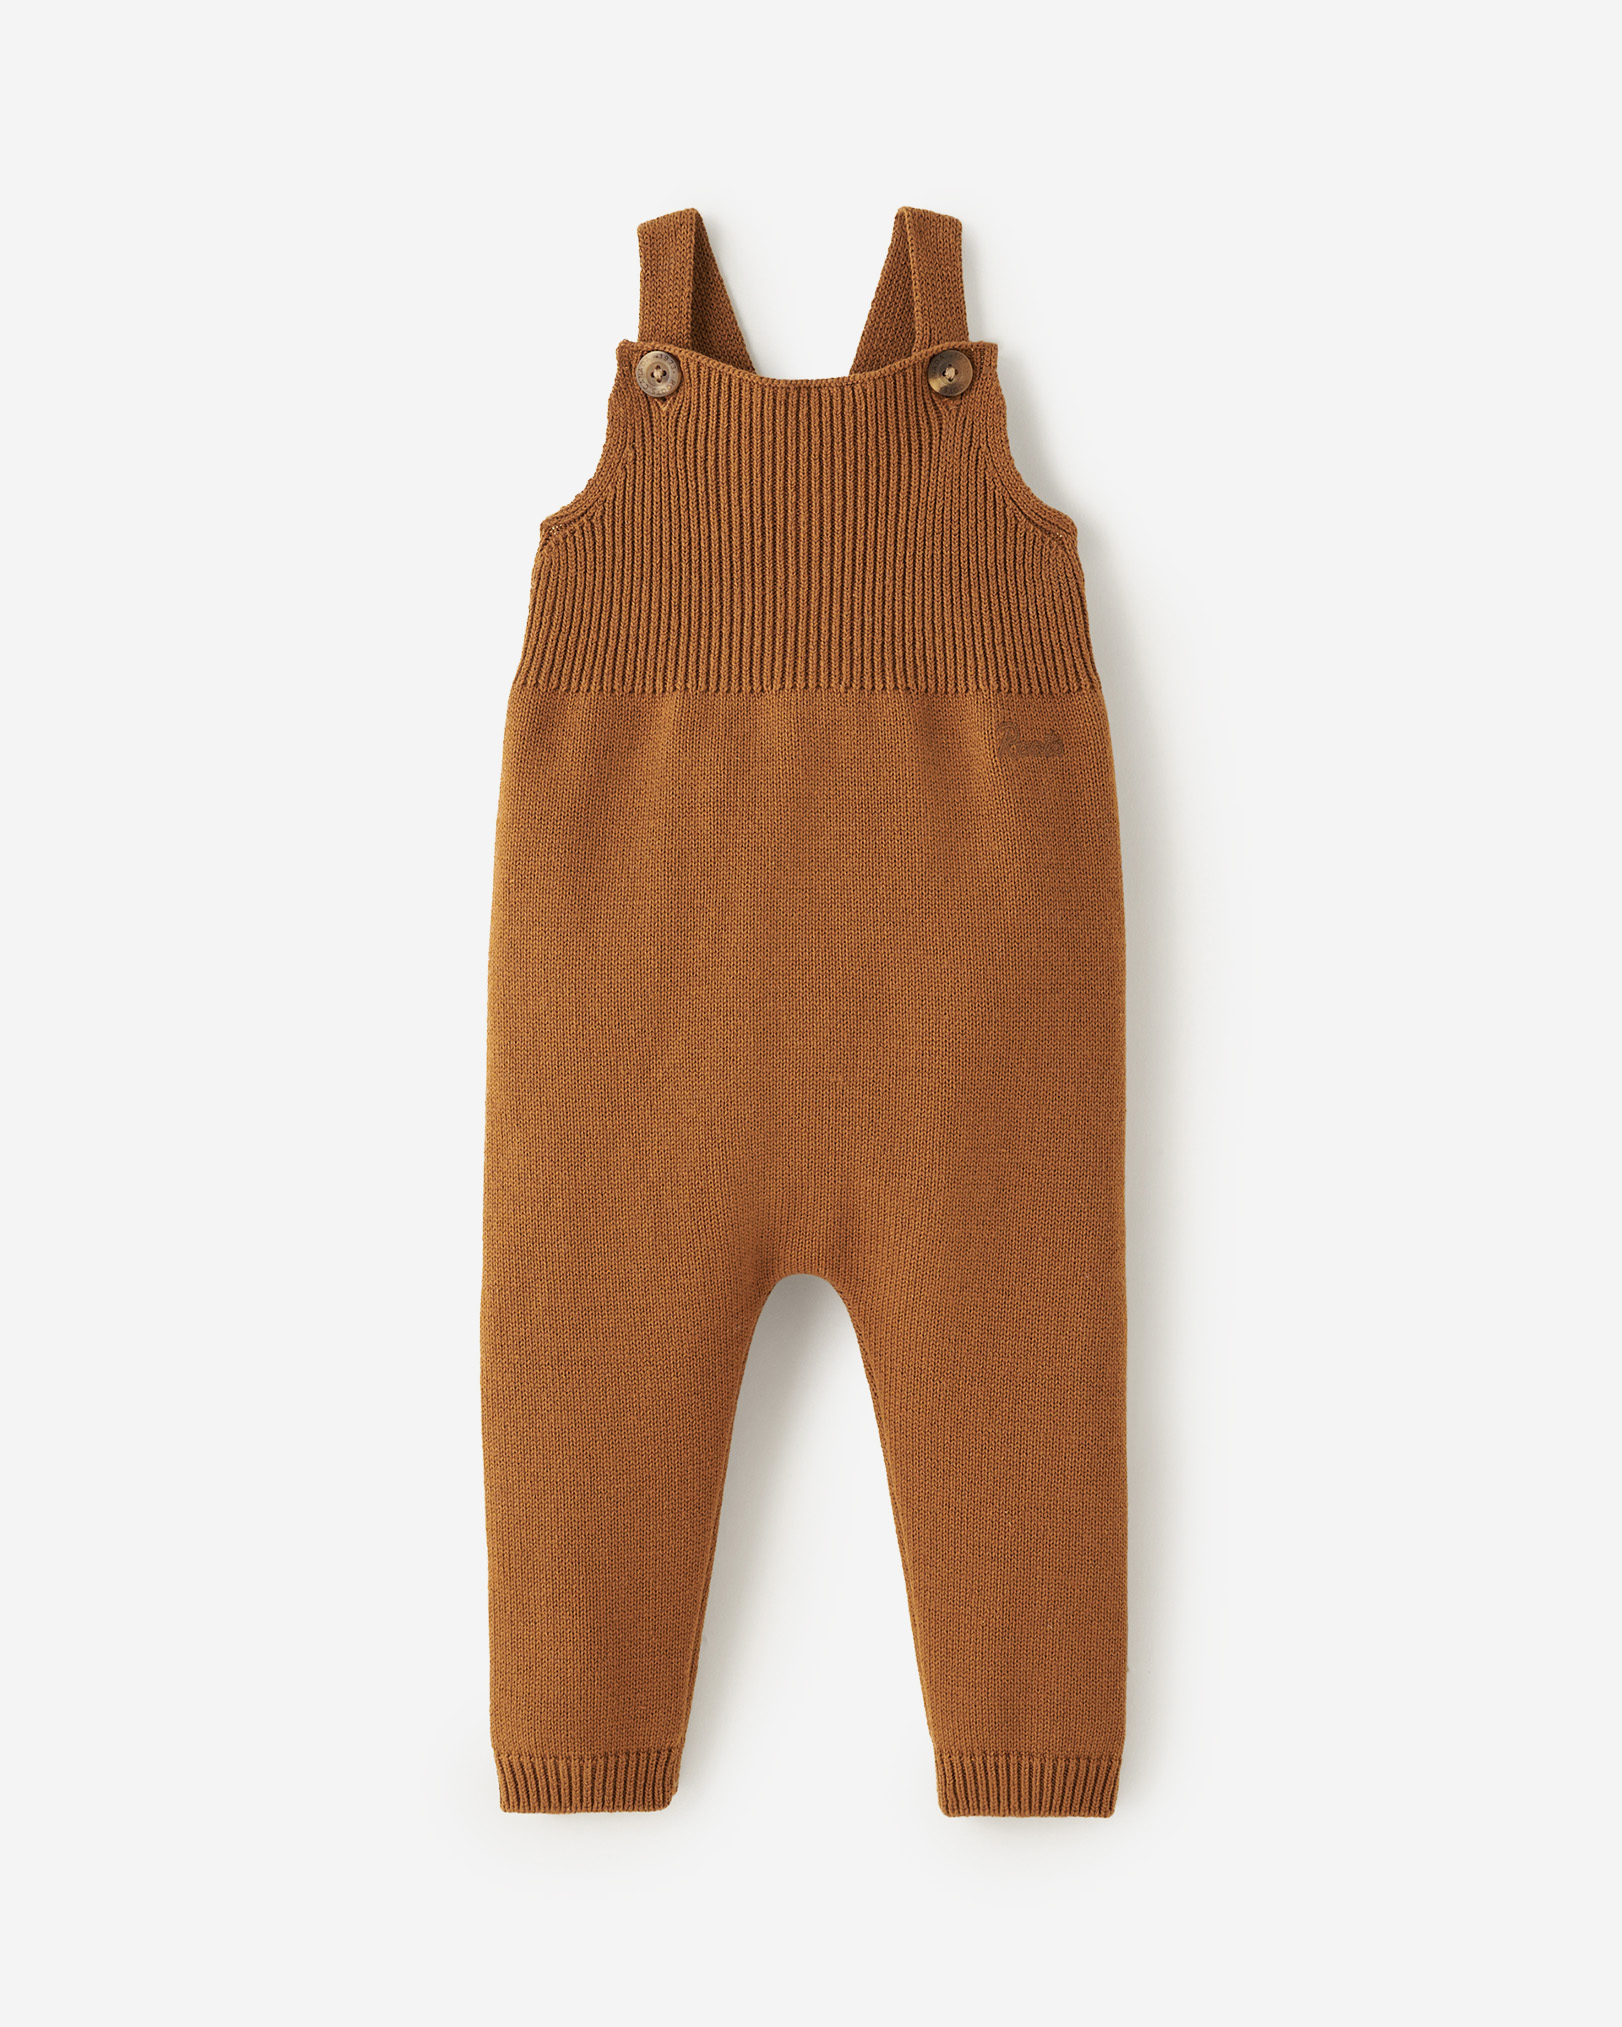 Roots Baby Sweater Knit Overall in Tannery Brown